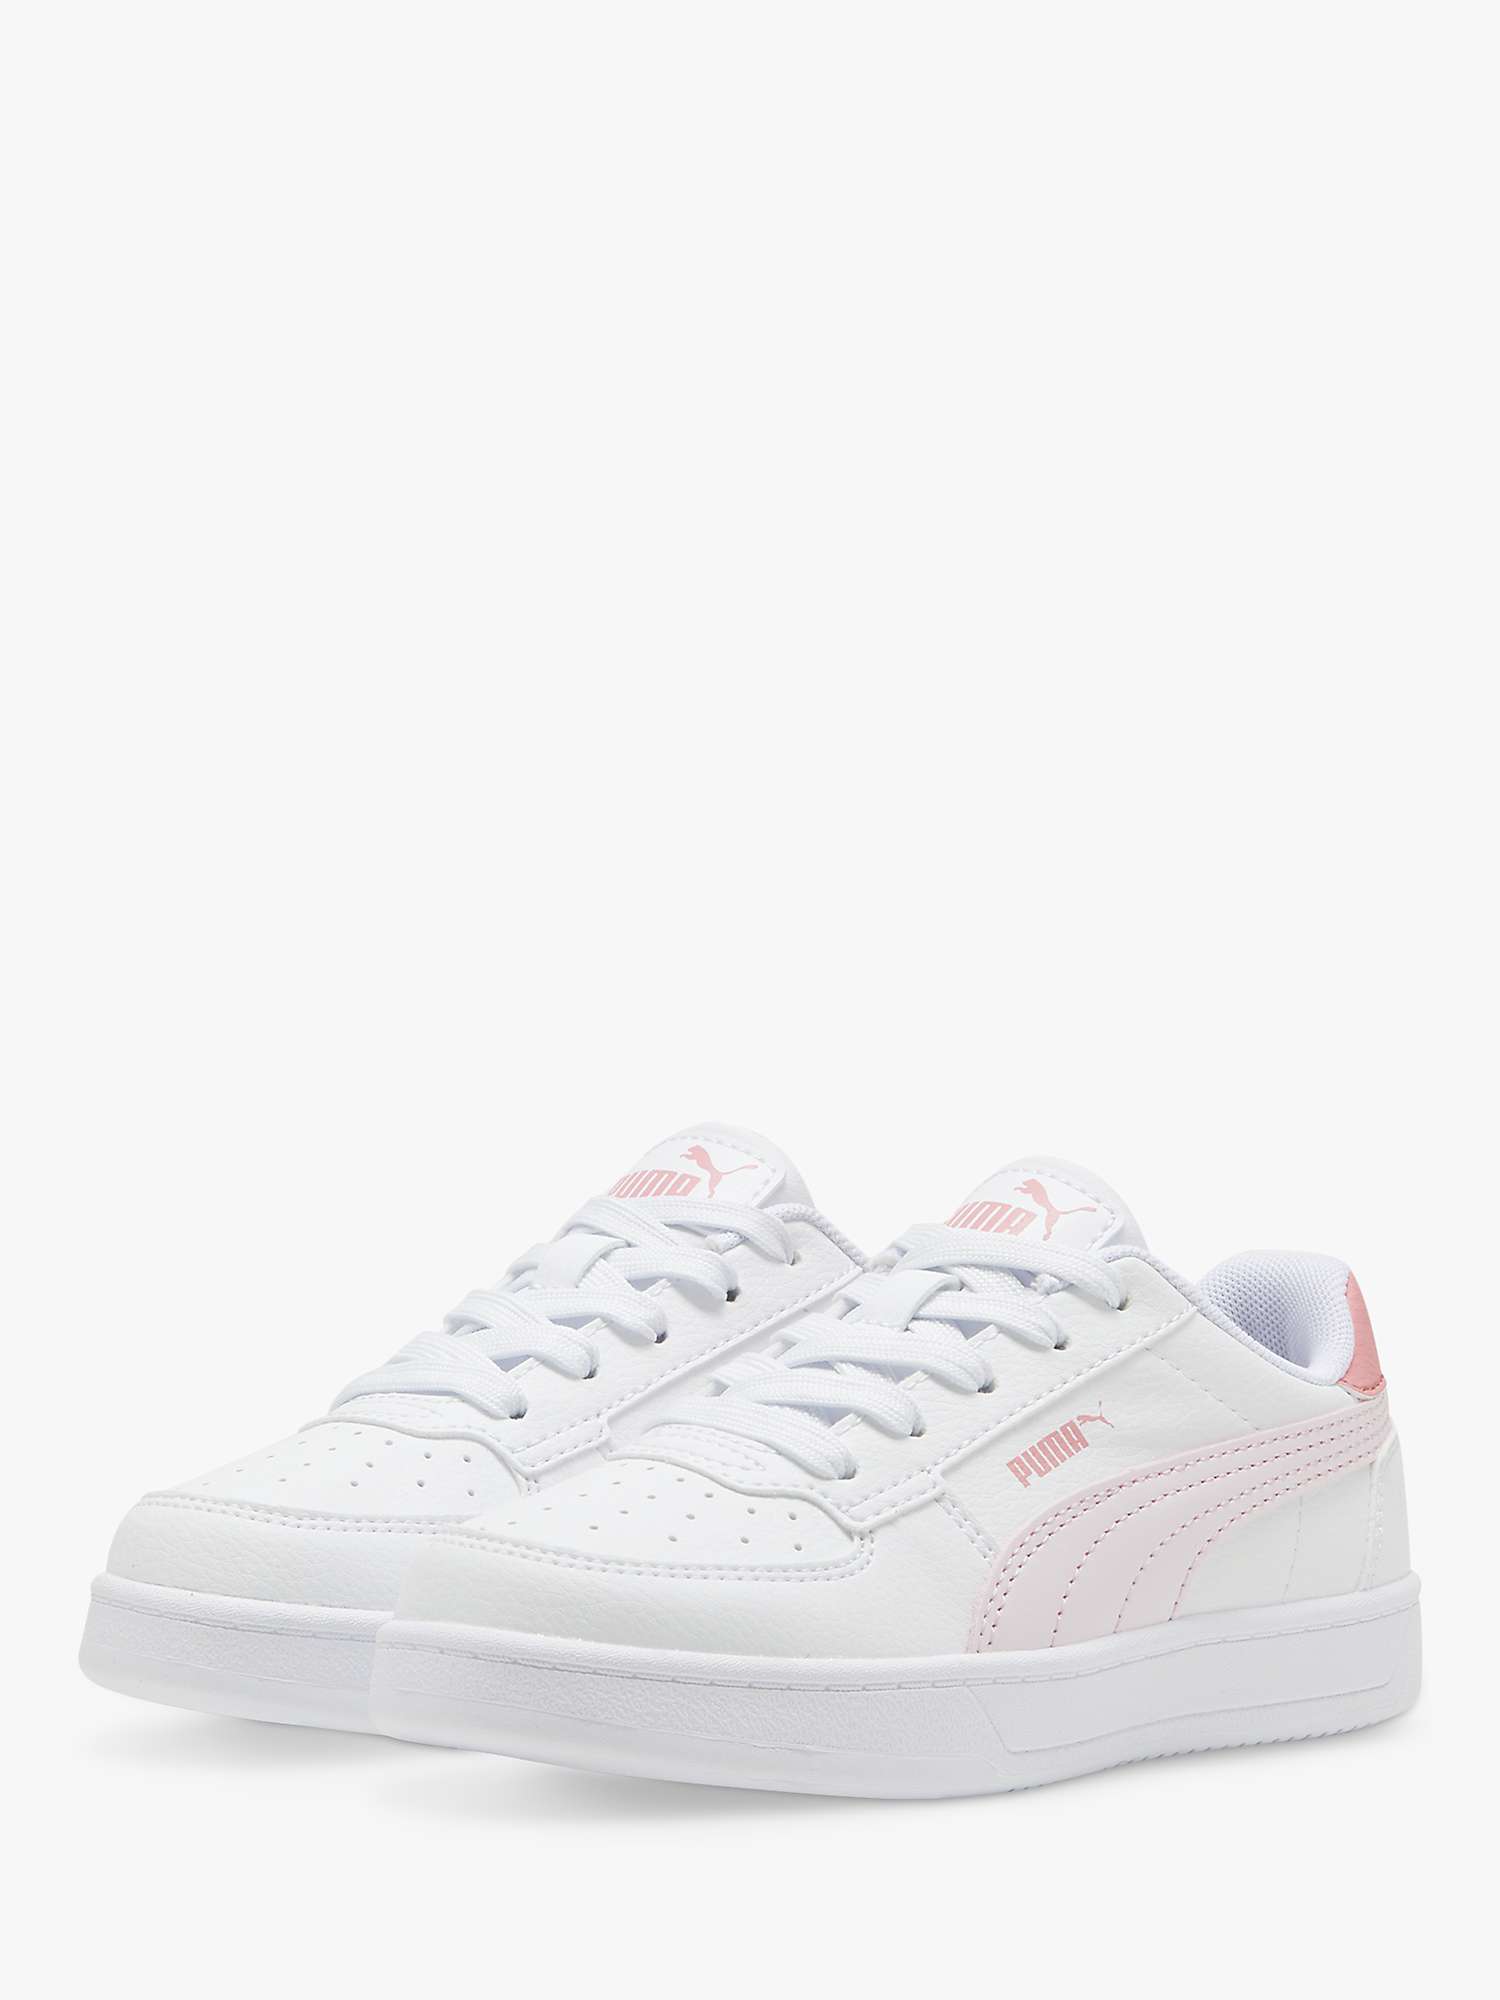 Buy PUMA Kids' Caven 2.0 Trainers, White/Pink Online at johnlewis.com